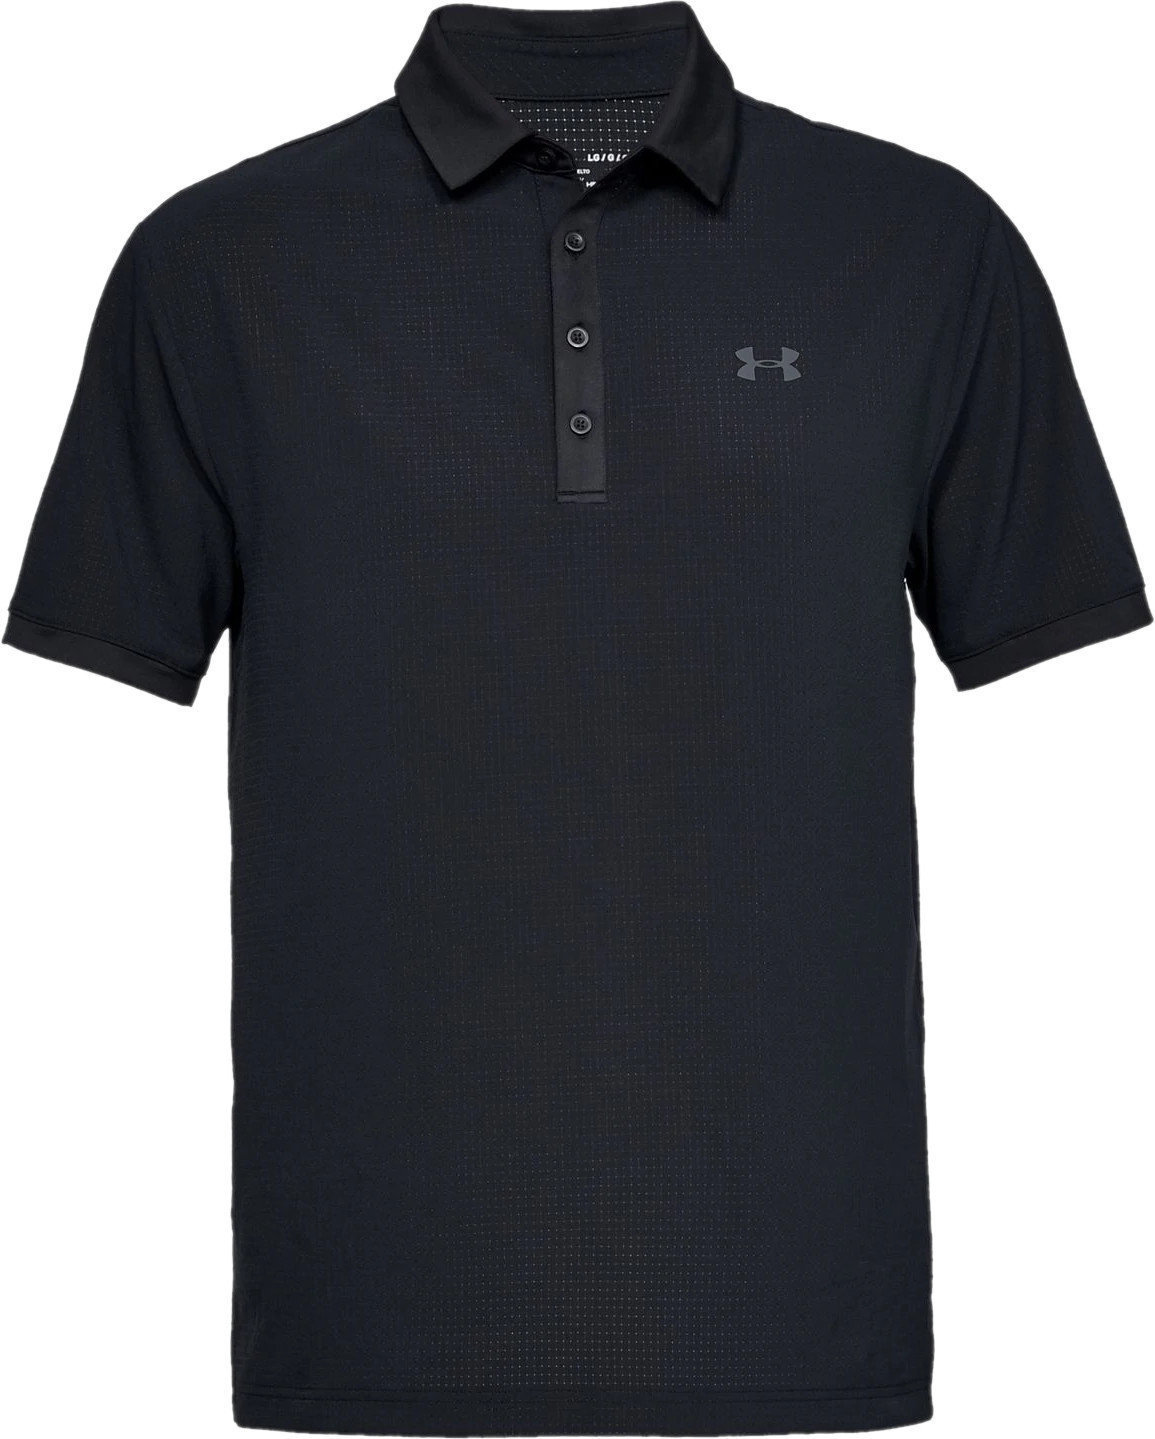 Polo Shirt Under Armour Playoff Vented Black L